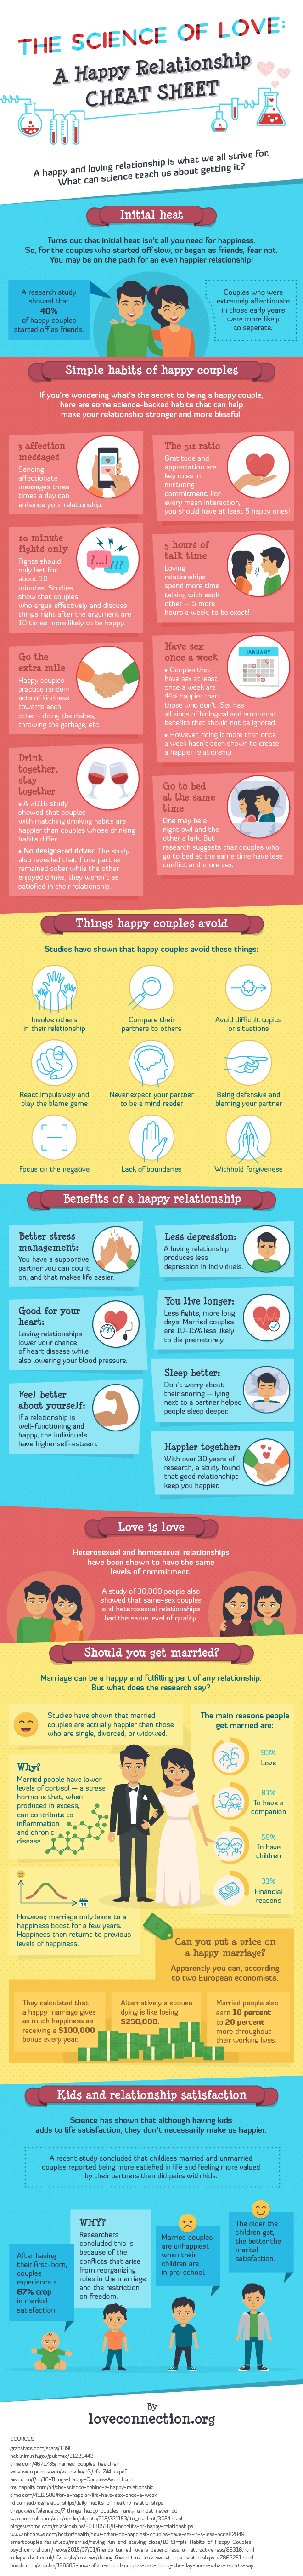 The Science of Love: A Happy Relationship Cheat Sheet